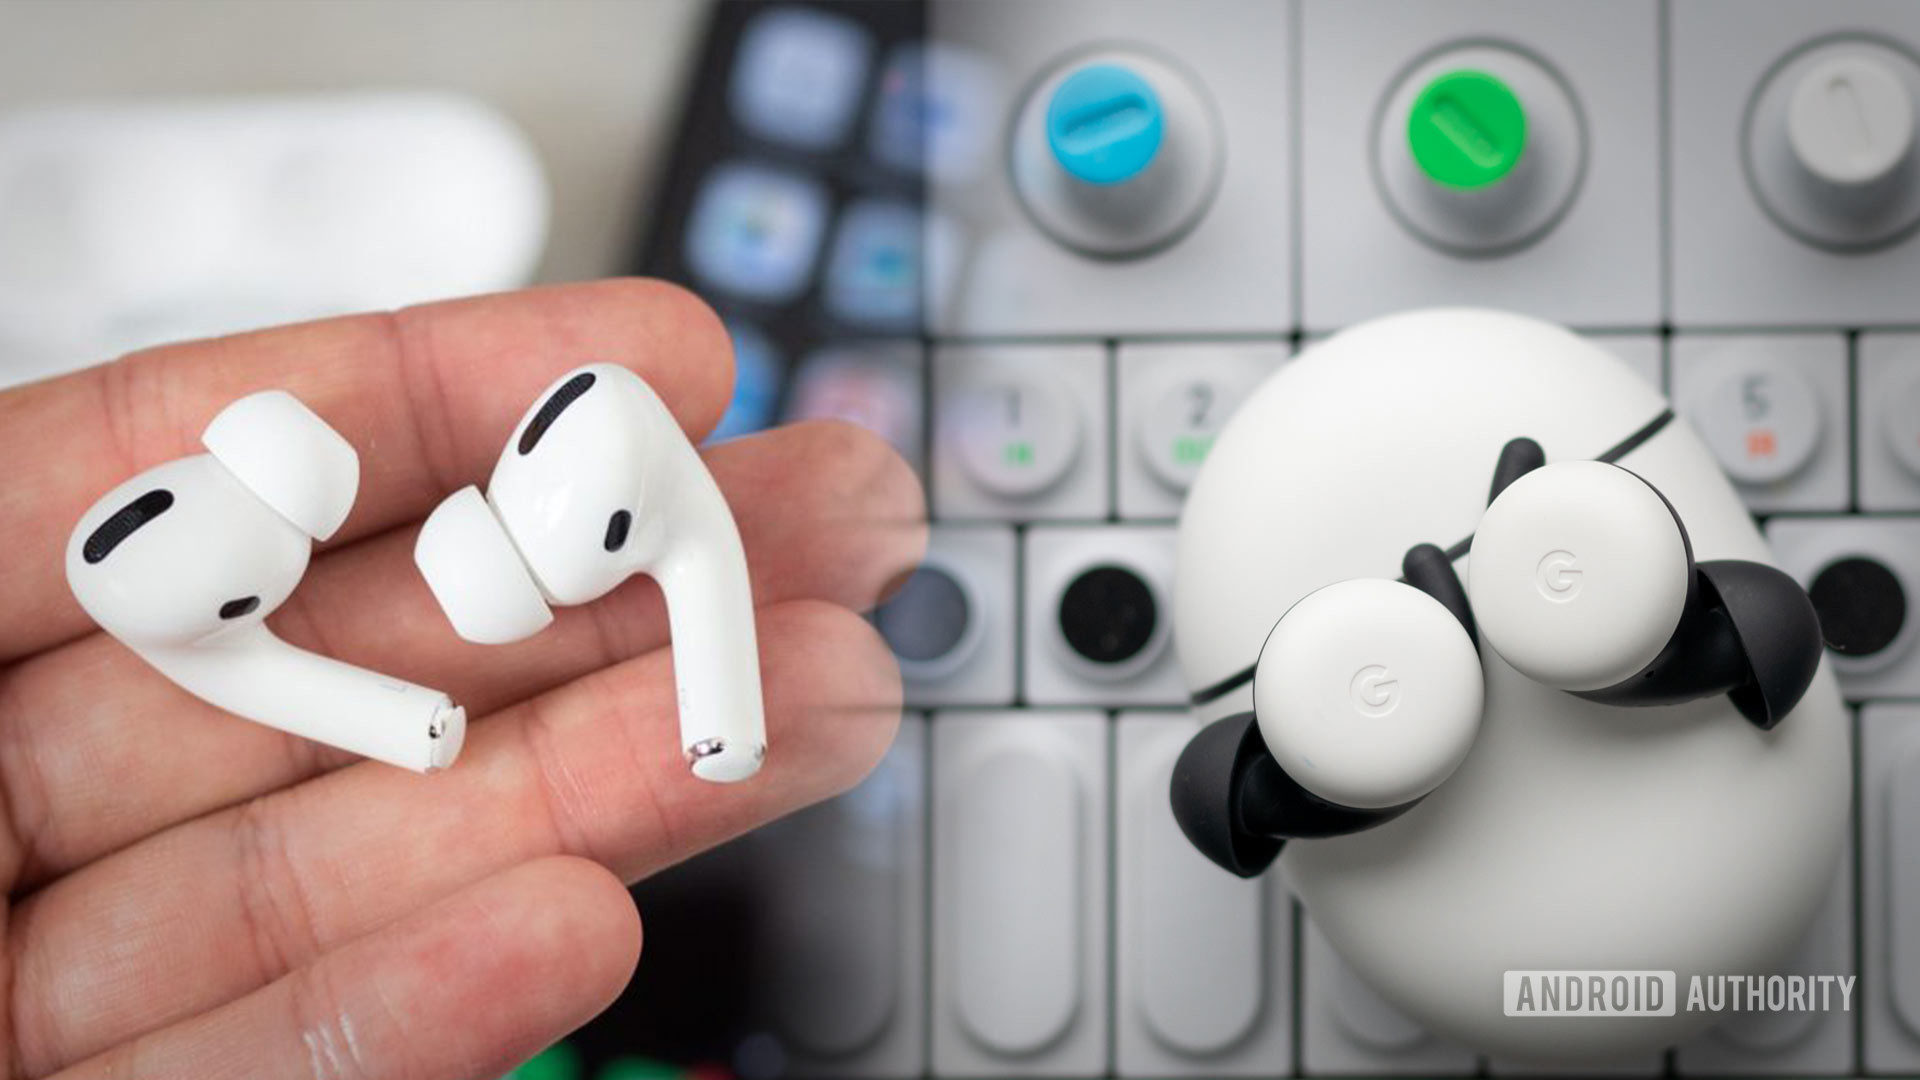 A picture of the Apple AirPods Pro vs Google Pixel Buds images blended together.